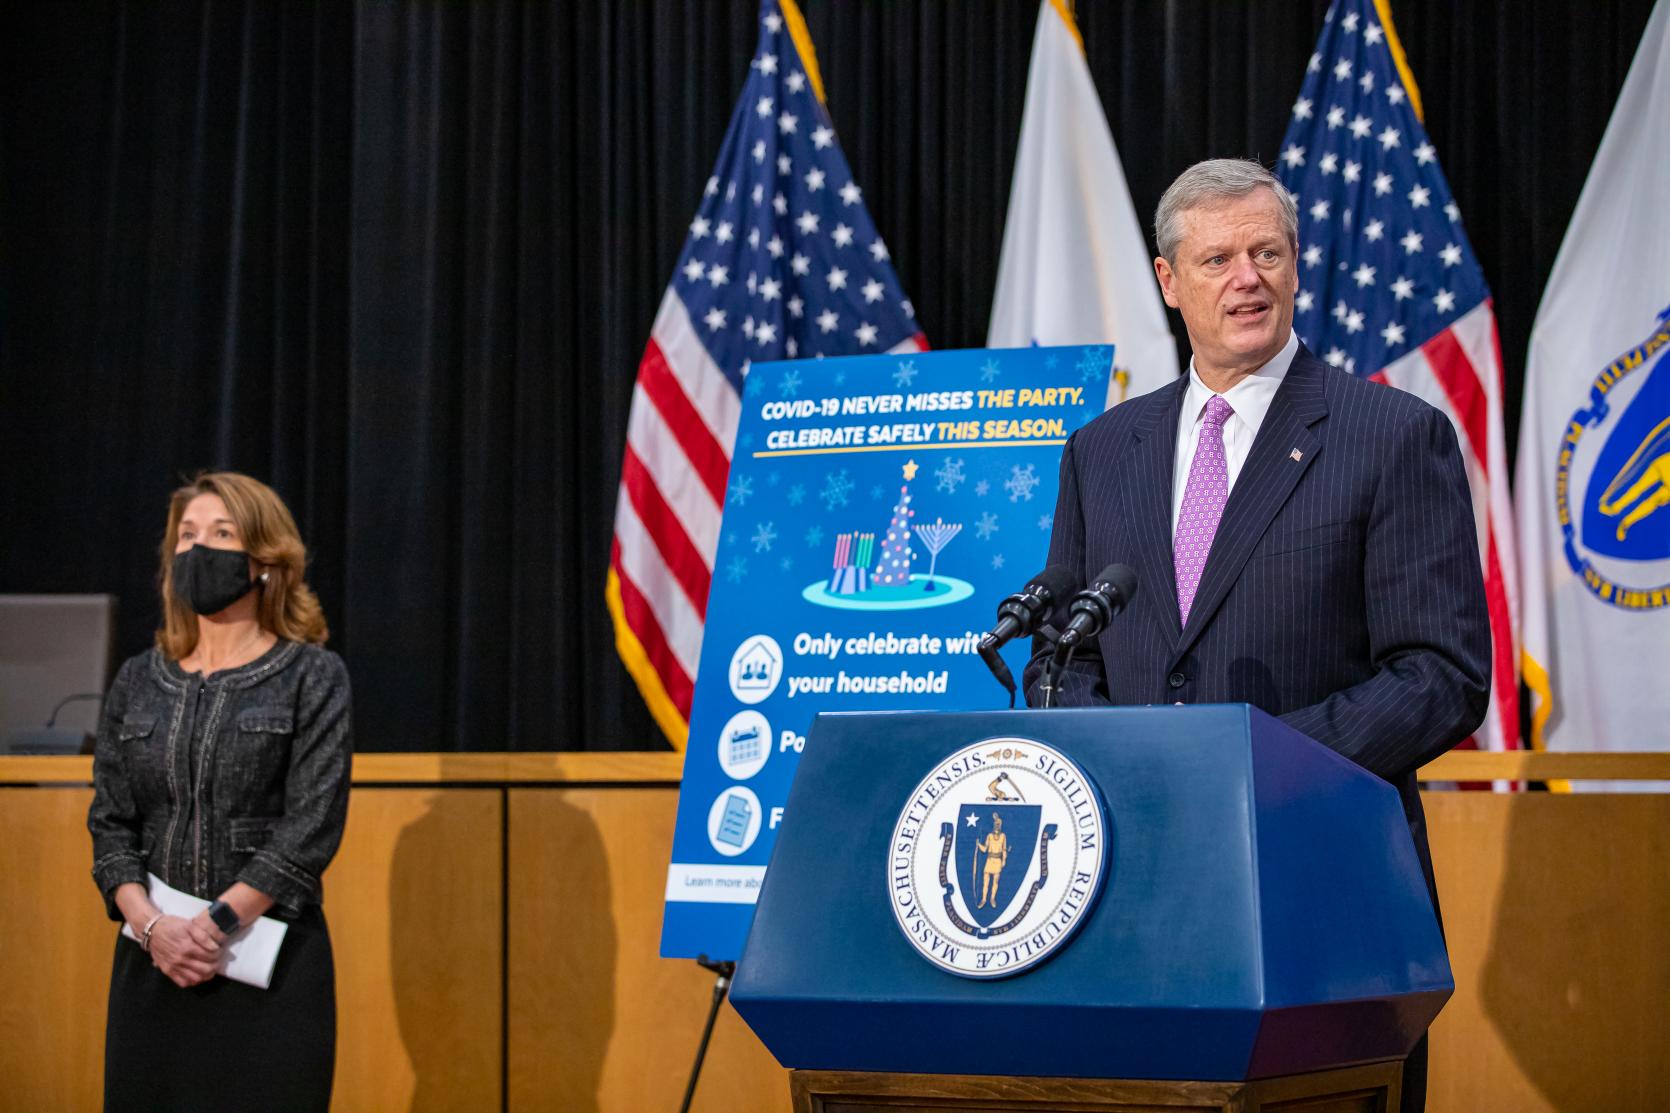 Baker-Polito Administration Announces Vaccine Update, New Holiday Guidance